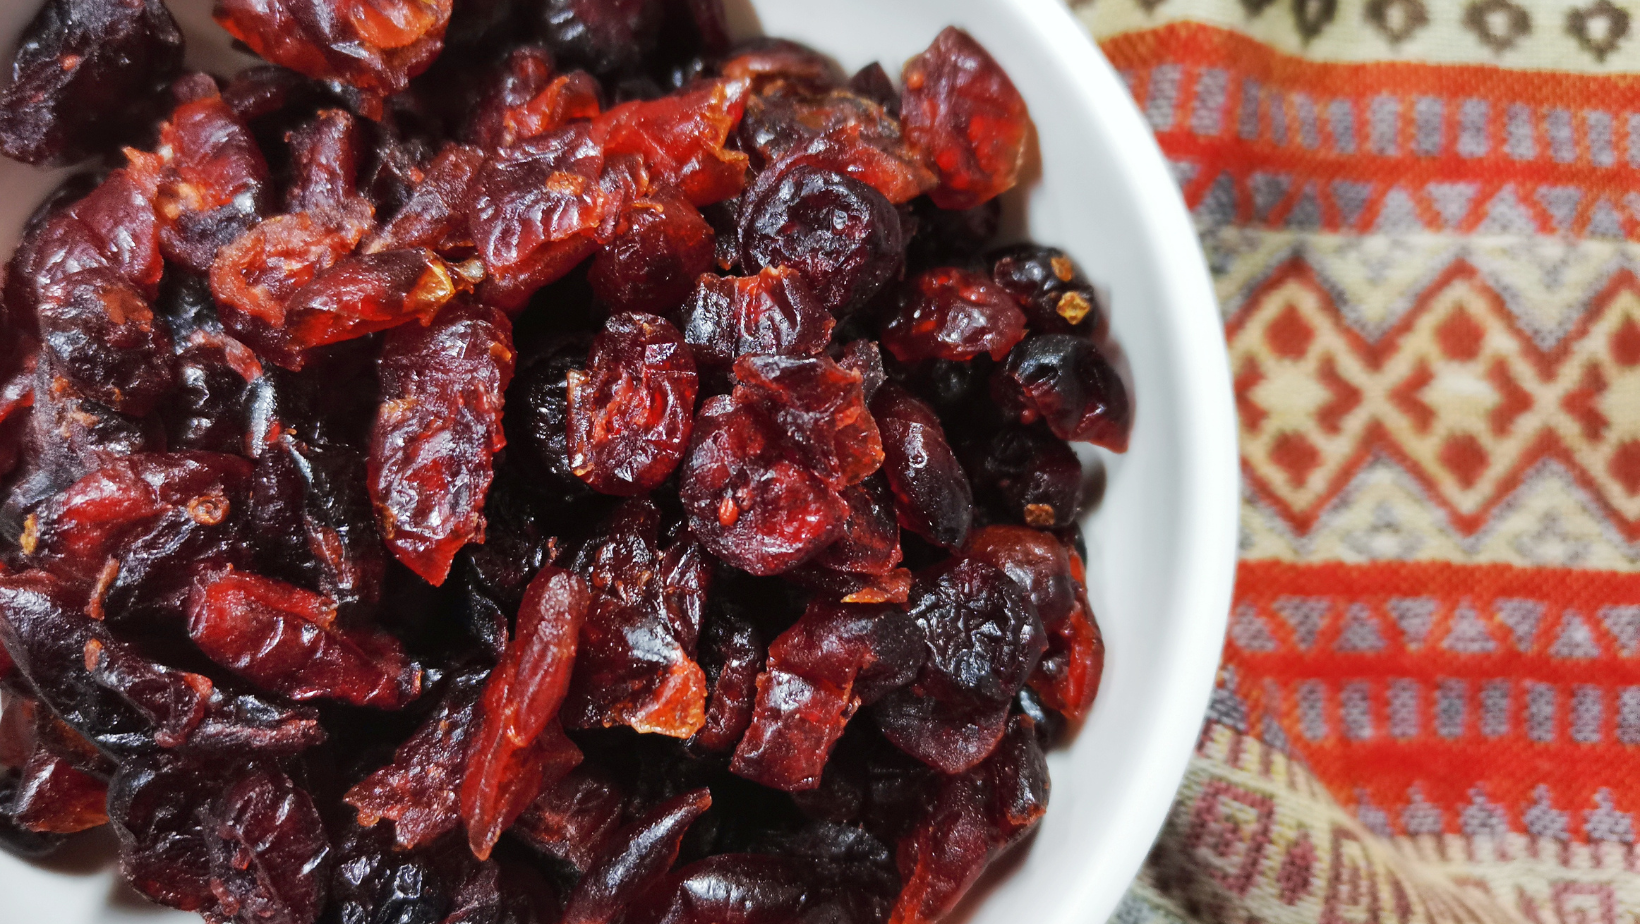 A vibrant, colorful bowl of dried cranberries symbolizing health and vitality.